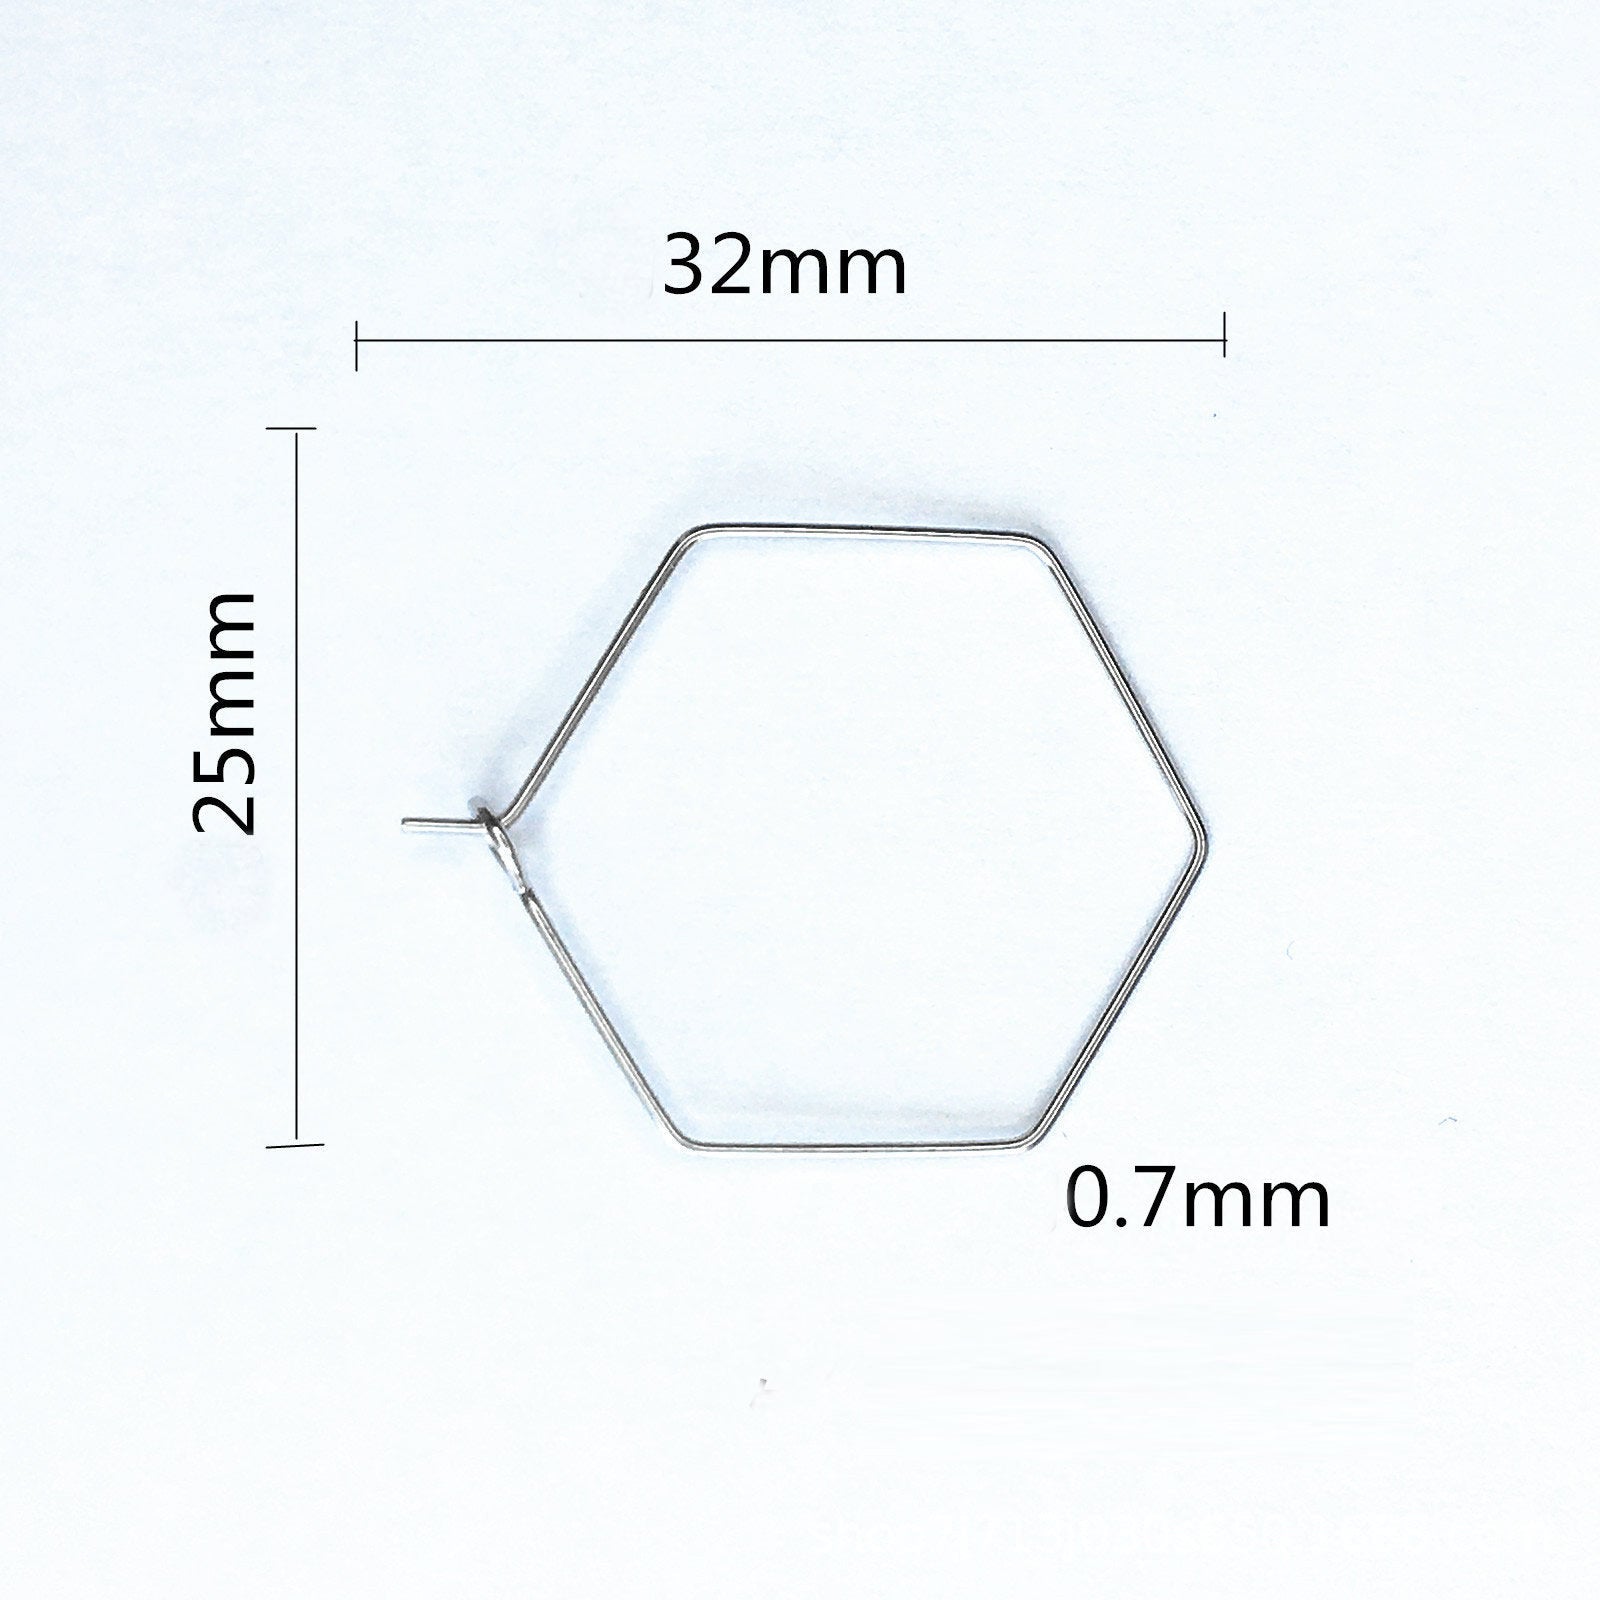 Stainless steel hexagon hoops 10pcs (5 pairs) - 2 size available